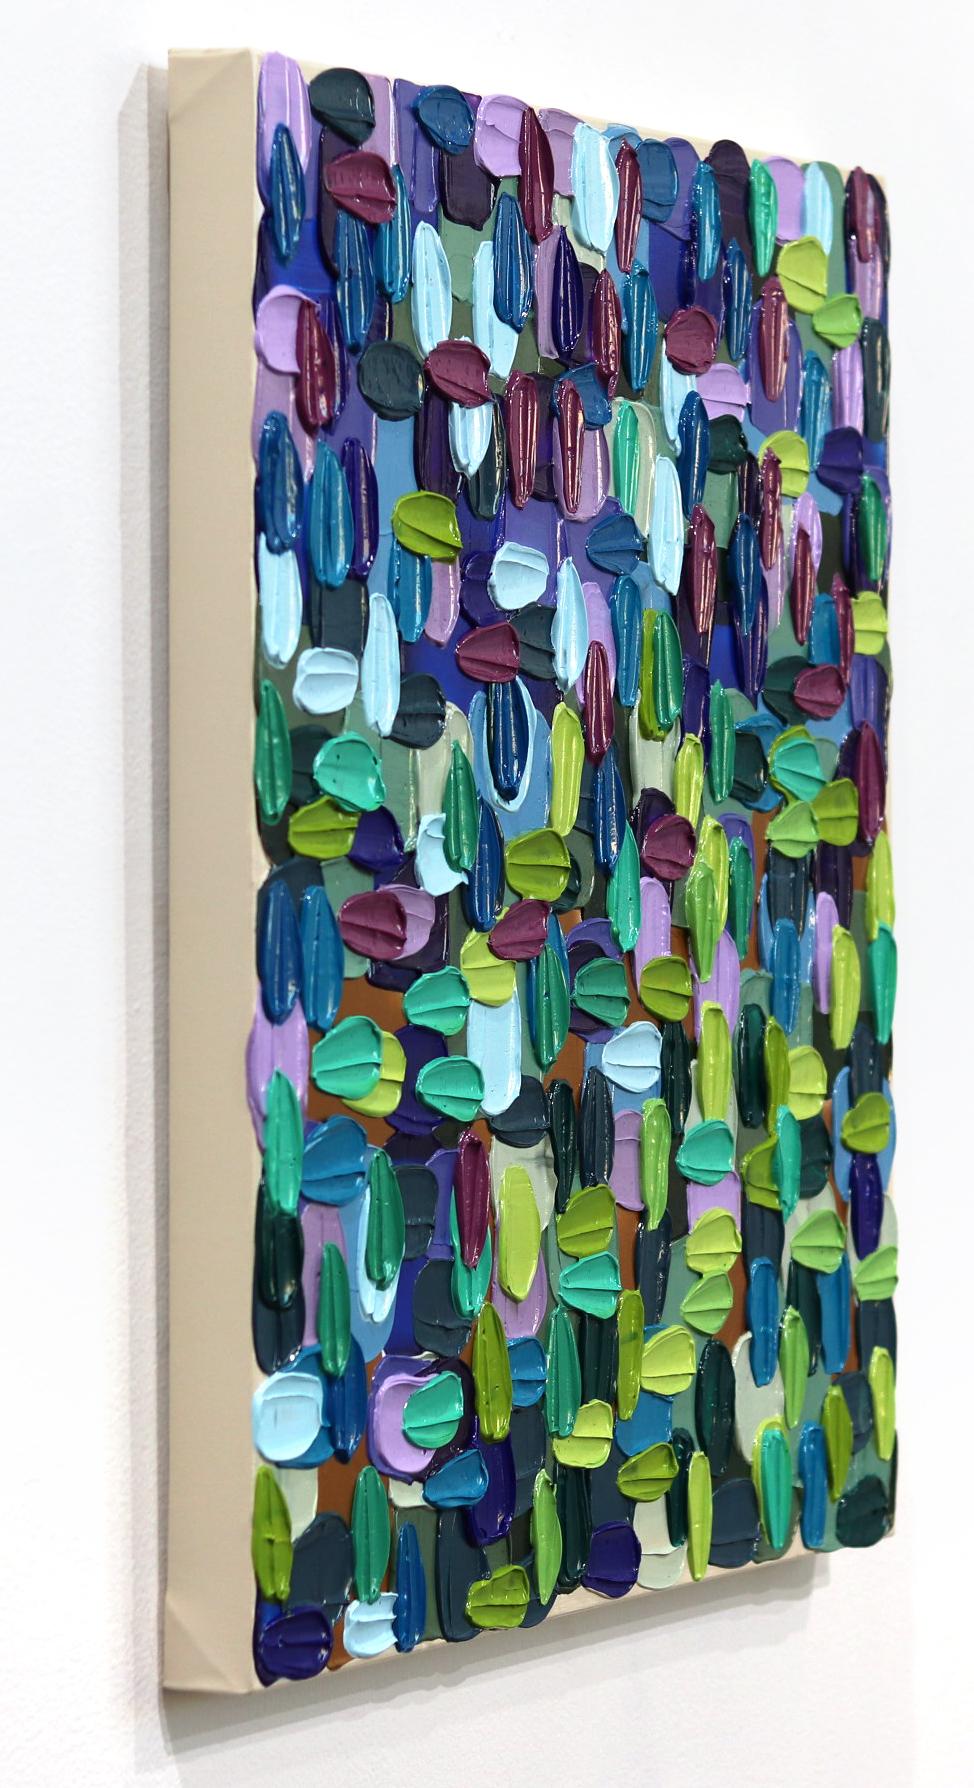 Impasto-painted strokes of bright colors are the framework of artist Shiri Phillips’ abstract artworks. Her paintings are flooded with texture through the layering of acrylic paint in fluent brushstrokes. Inspired by the vibrant surroundings she